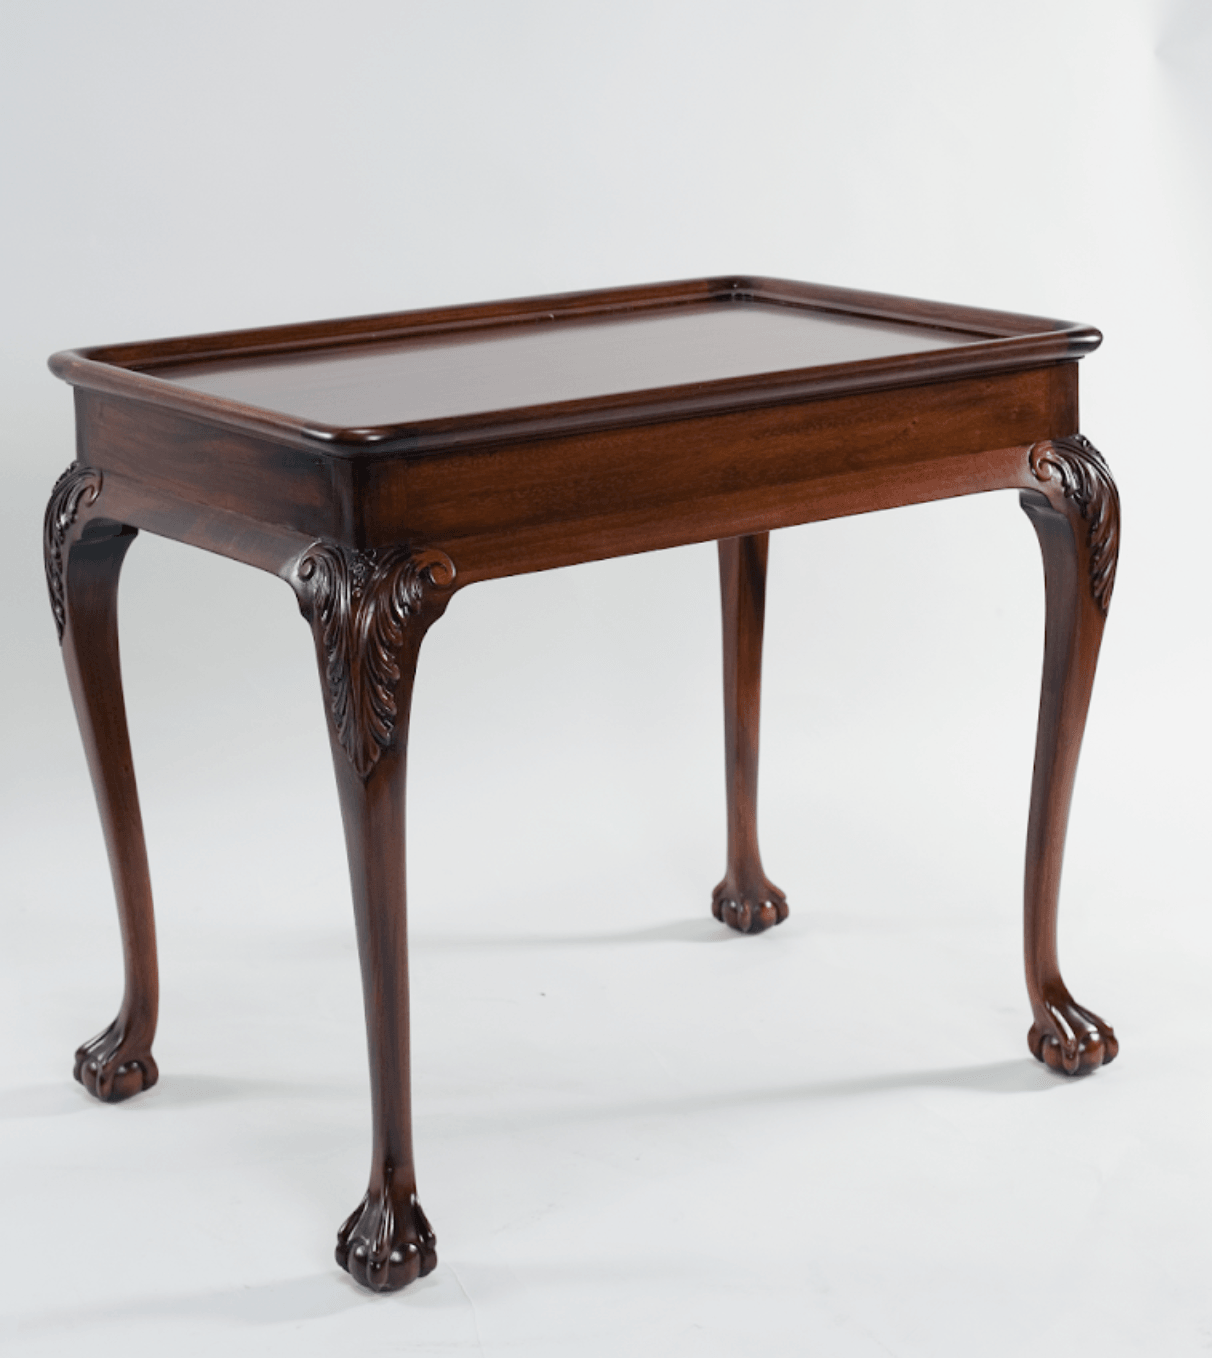 CHIPPENDALE TEA TABLE - House of Chippendale